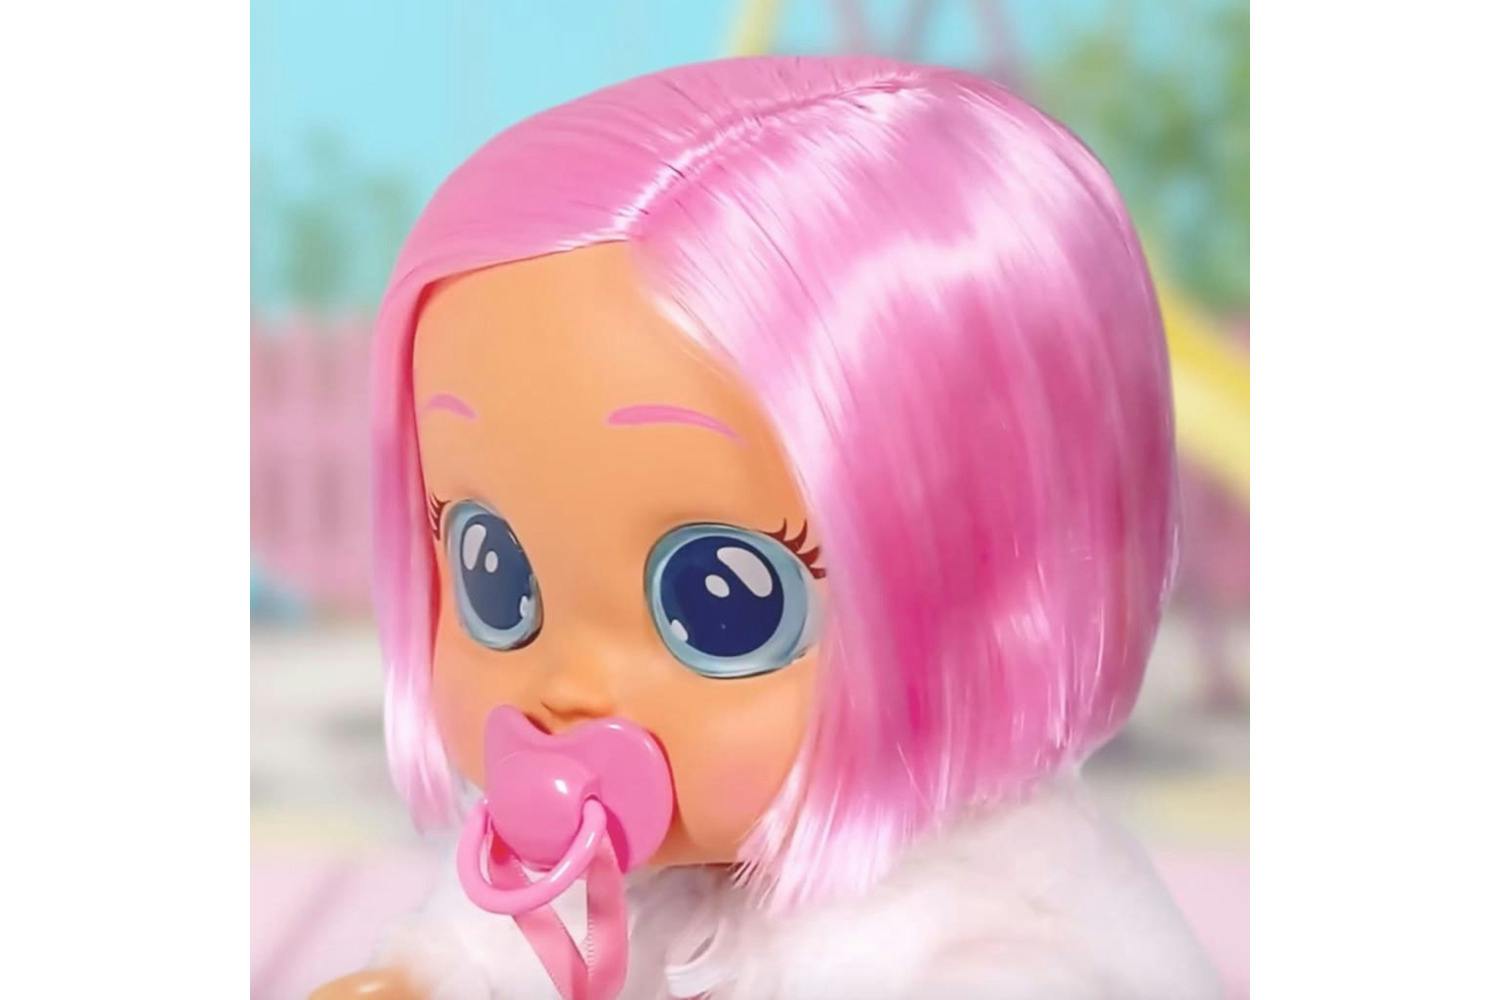 Cry Babies Dressy Coney 12 Baby Doll - Pink Hair